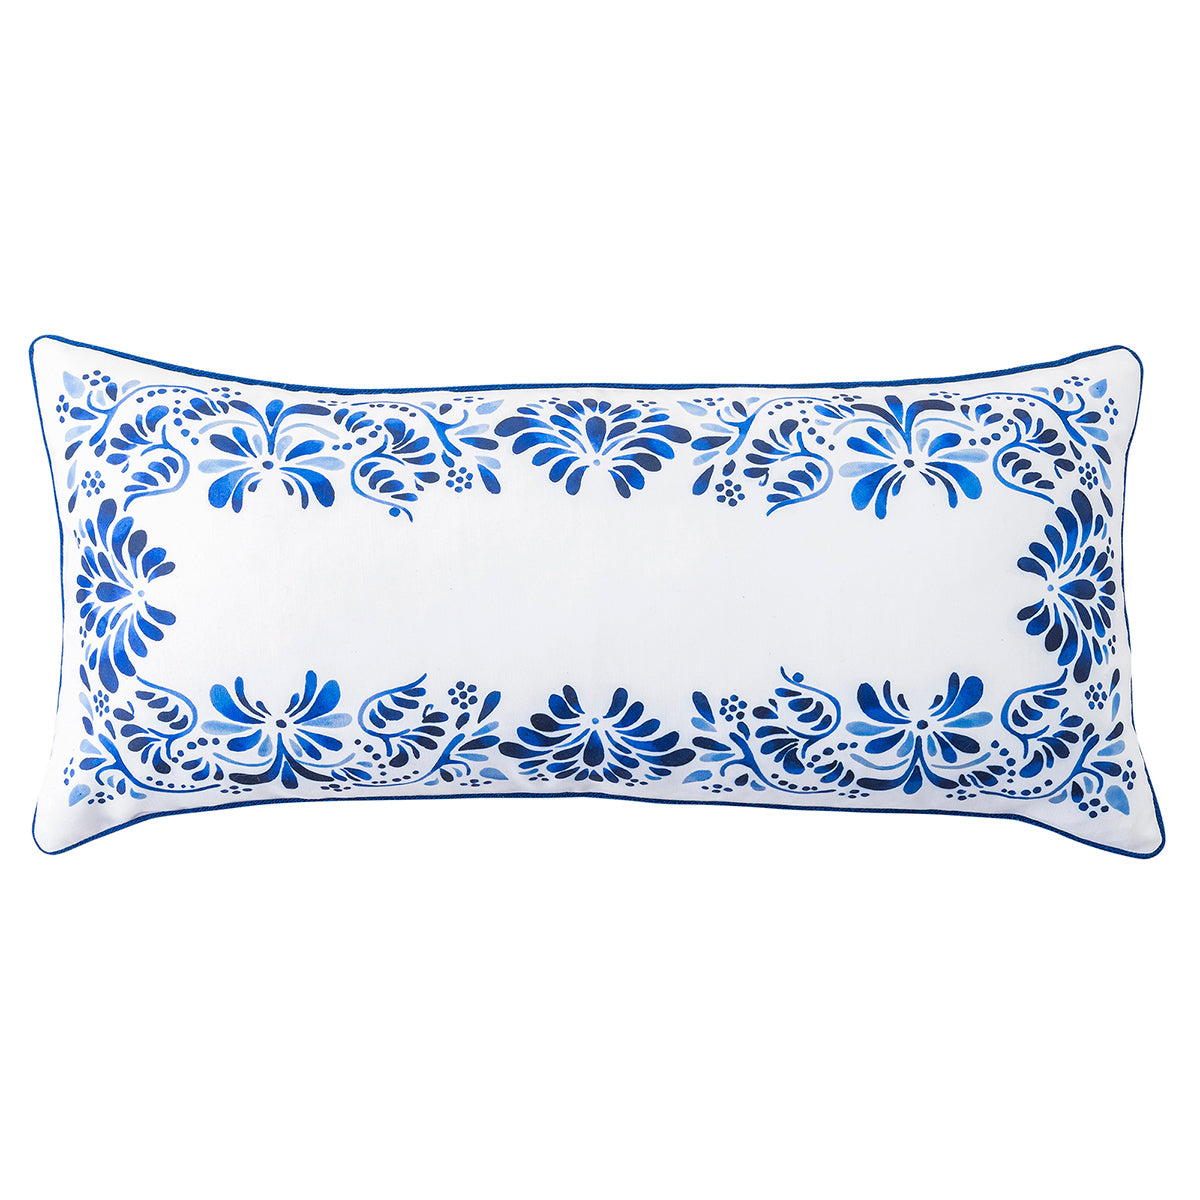 Rimmed in a beautiful cobalt border with motifs from our Iberian Journey dinnerware pieces, this lumbar pillow would look lovely nestled on a living room couch or as a finishing touch to a master bedroom. 